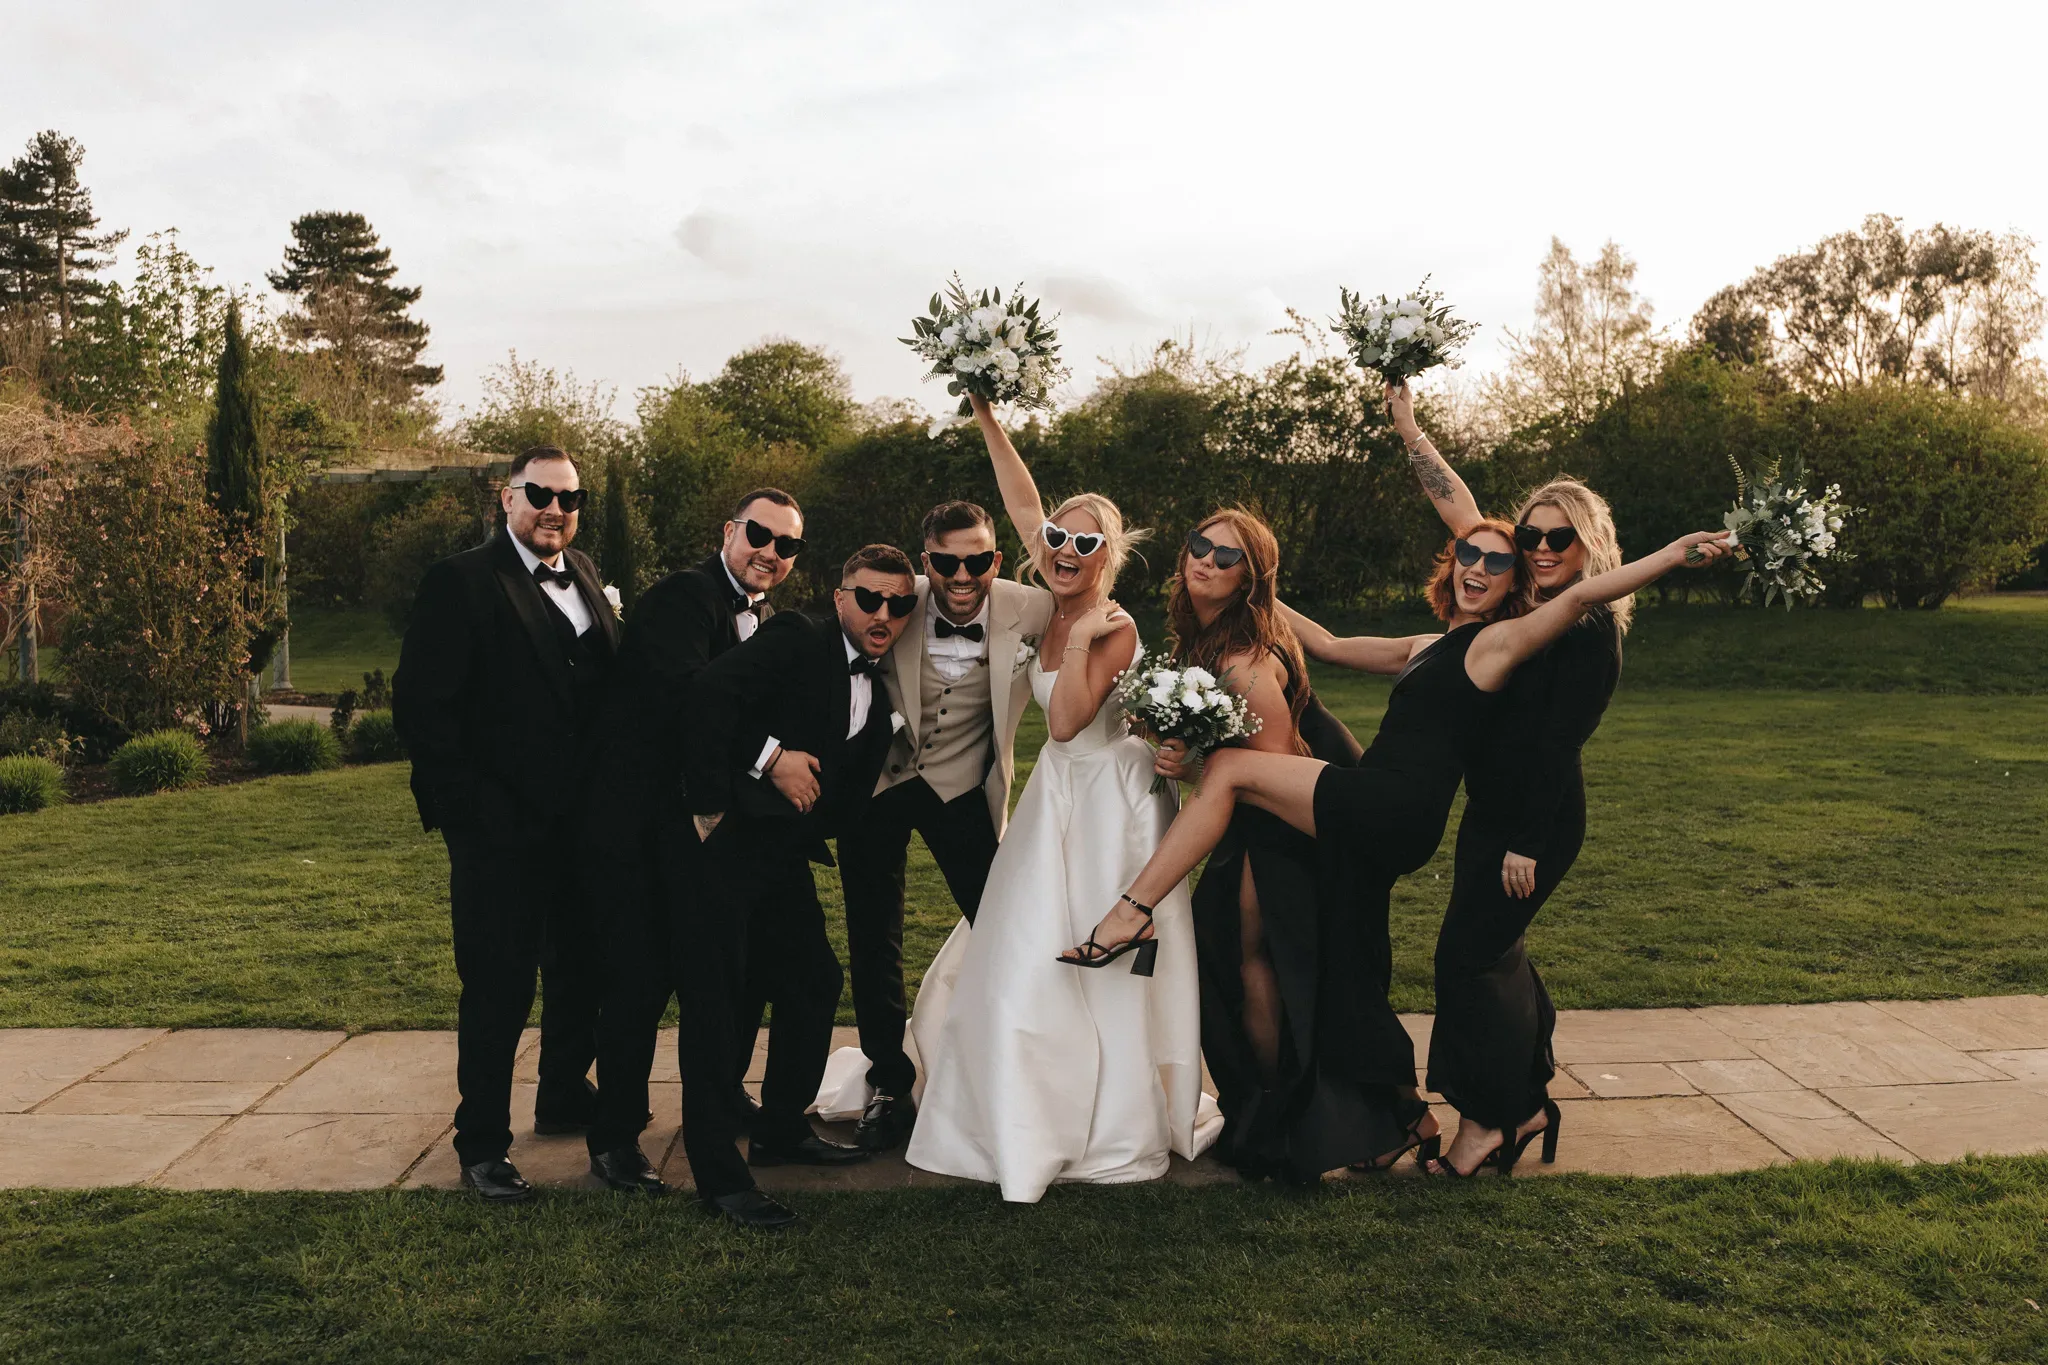 A joyful wedding party outside, featuring a bride and groom in the center surrounded by four bridesmaids and three groomsmen, all dressed elegantly in black, celebrating with playful poses on a grassy field at sunset. Aimee Lince, Kind Words.